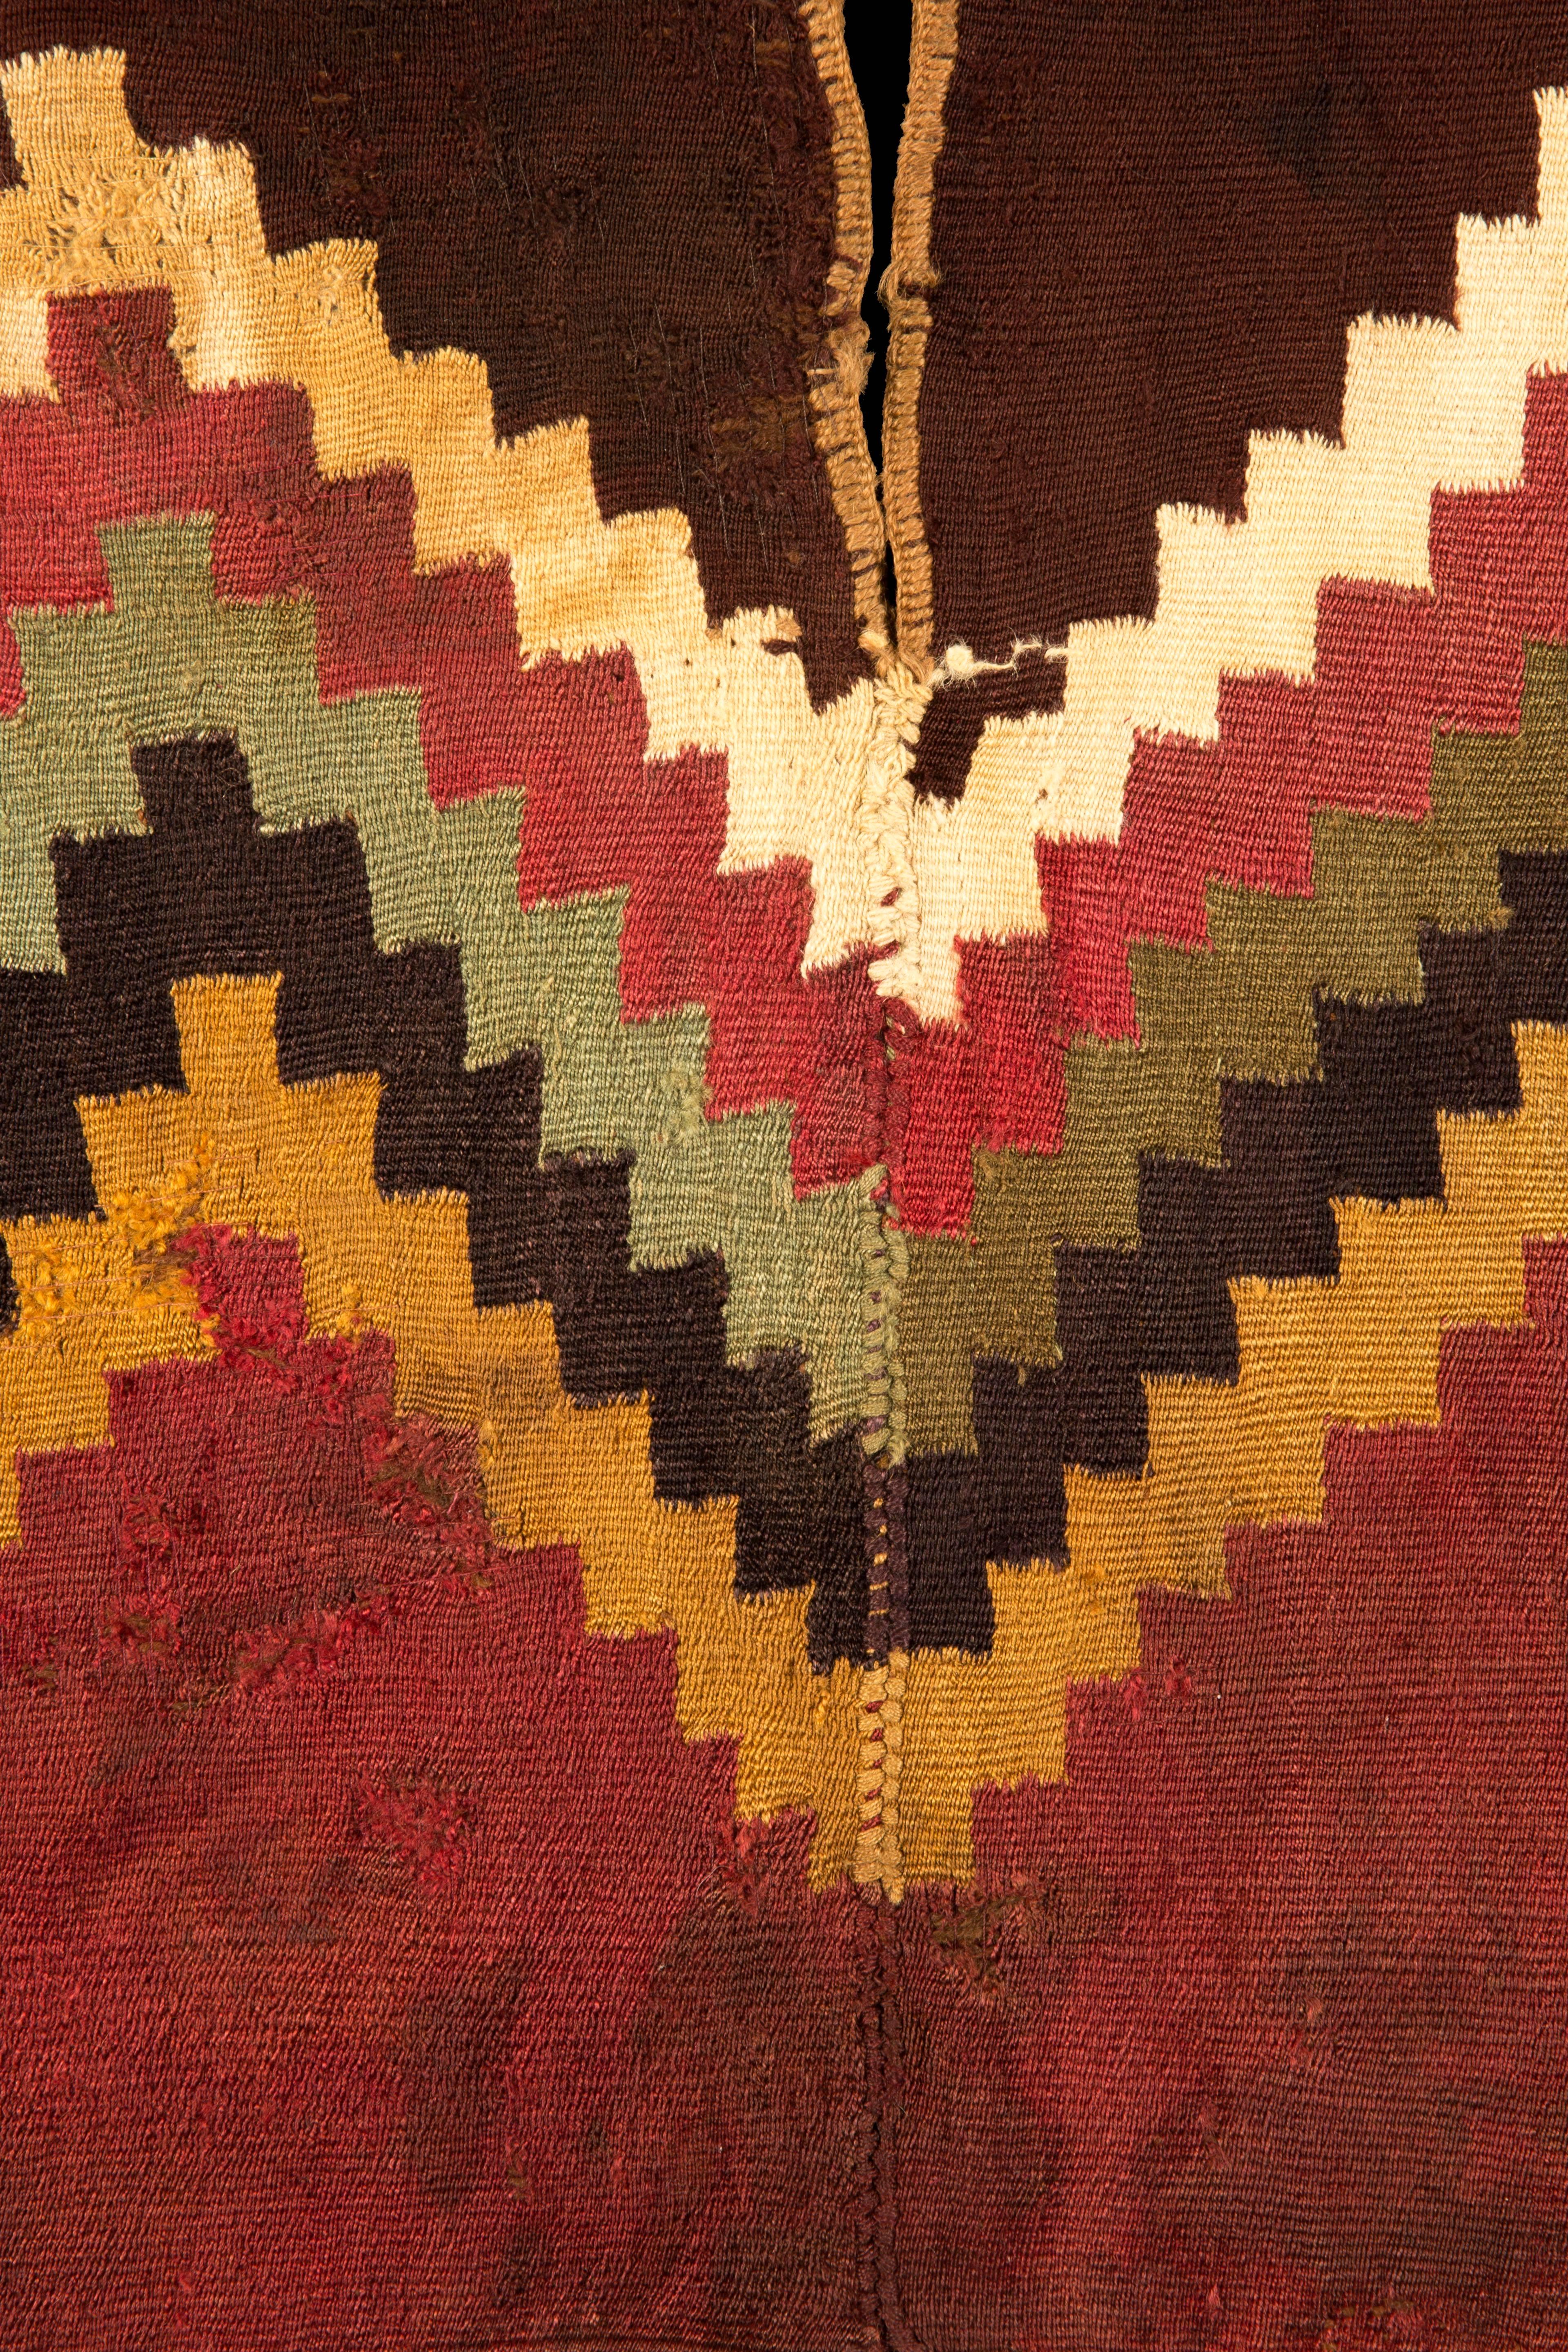 Complete Nazca unku with white, red, green, black and yellow step zig-zag design with red bottom with fringe and maroon upper part and beige trim around the arm and neck openings

200-300 CE

Nazca, Peru

Size: 38 in x 18 in.